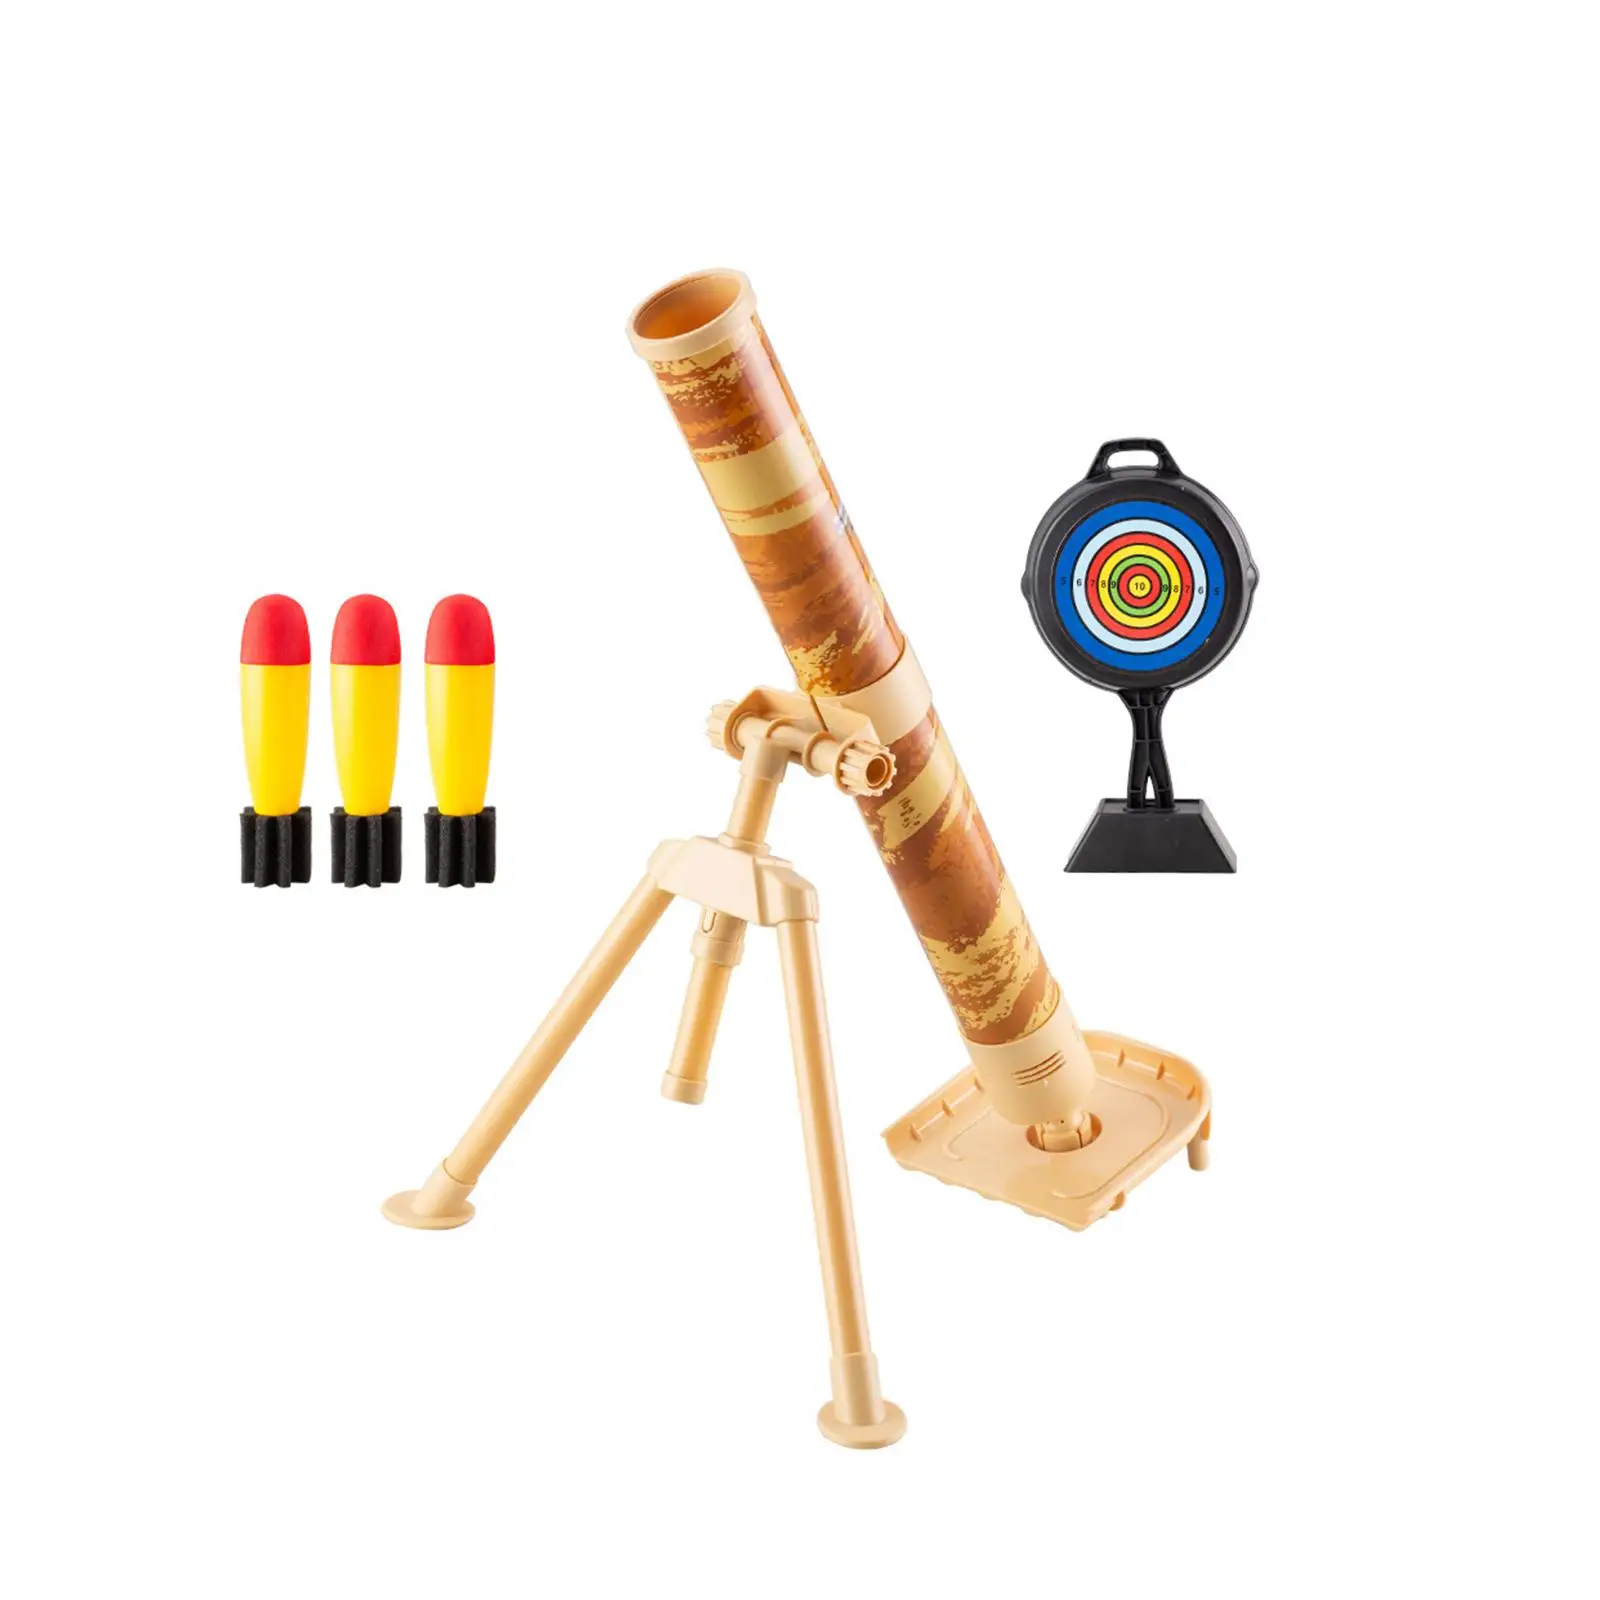 Mortar Launcher Toys Game for Kids Boys and Girls Festival Gifts